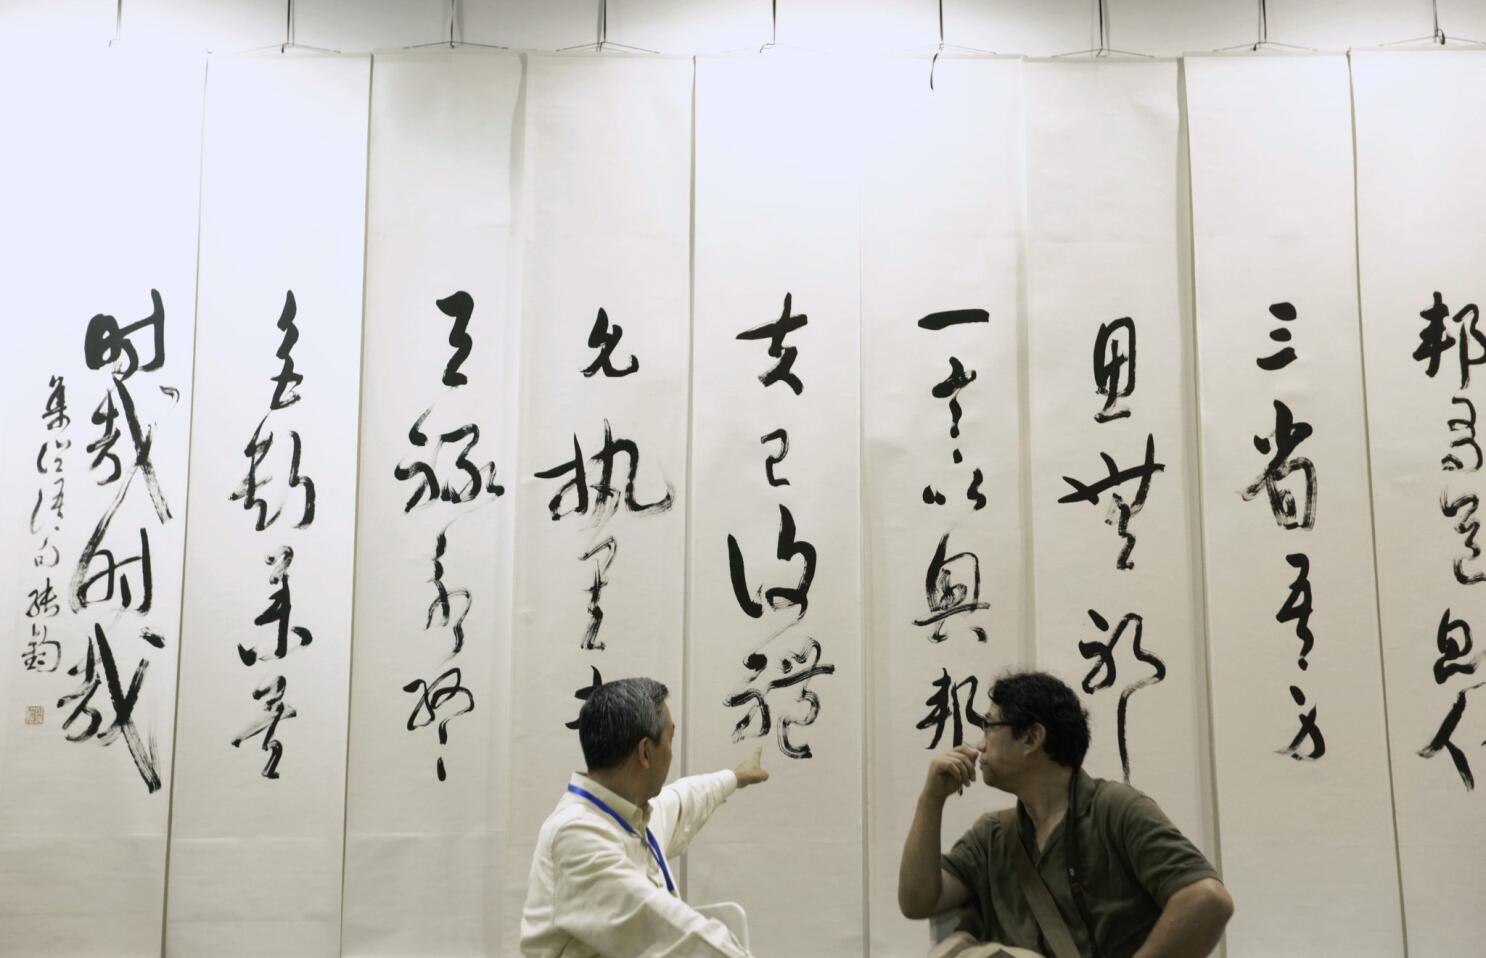 Chinese Calligraphy, Asia for Educators